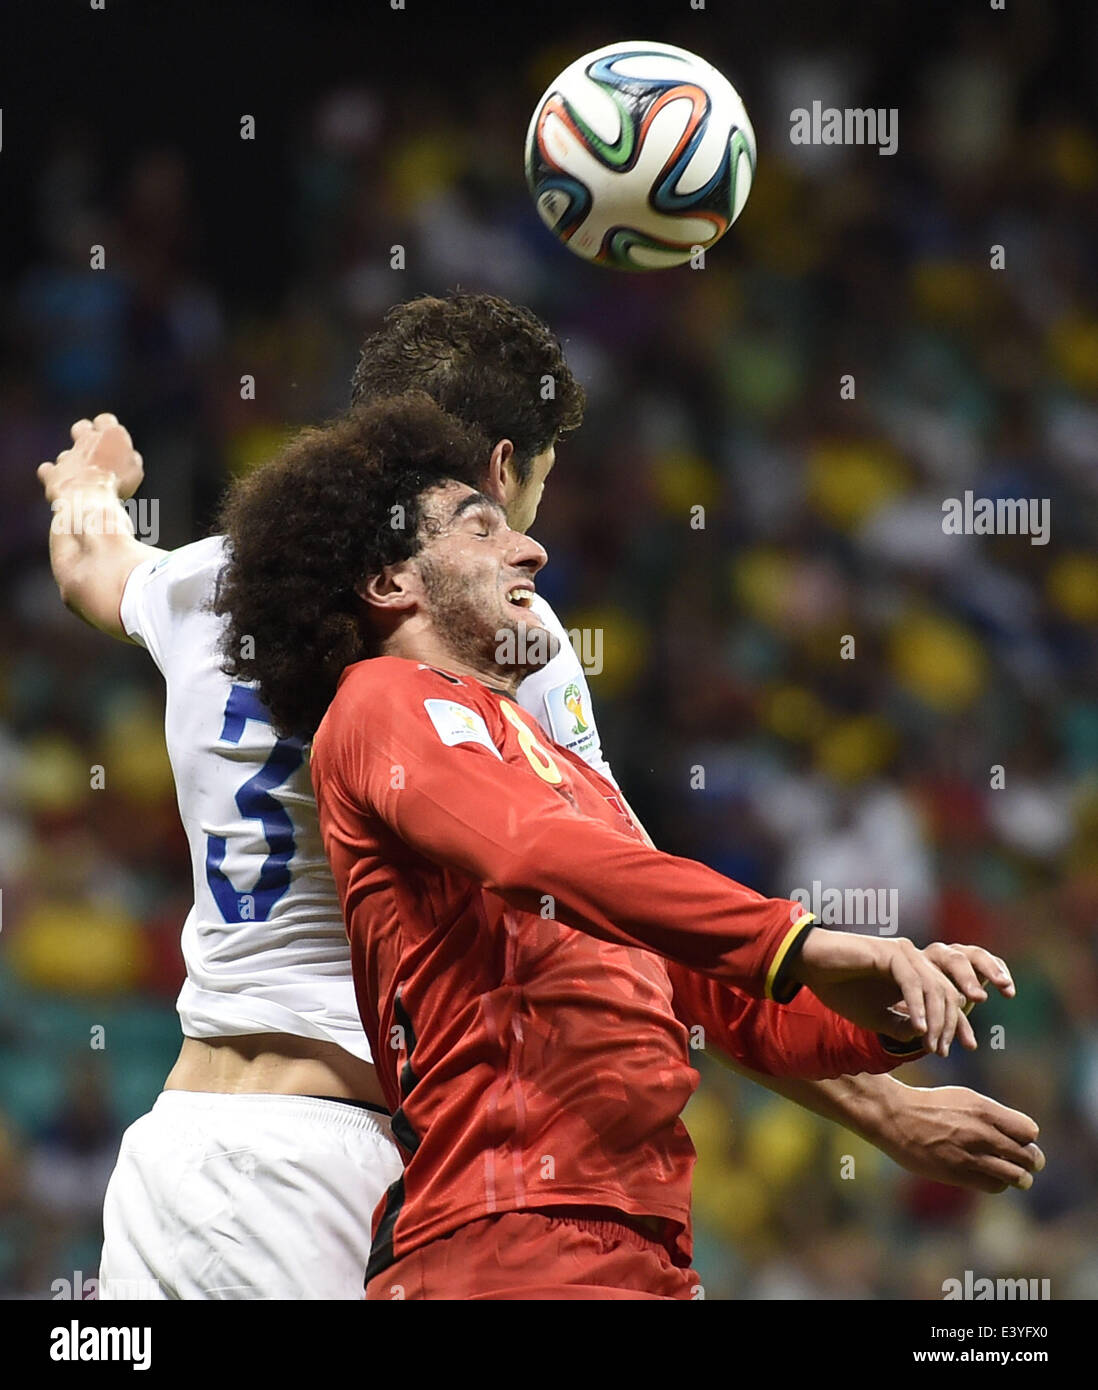 Salvador, Brazil. 1st July, 2014. Omar Gonzalez (L) of the U.S. competes for a header with Belgium's Marouane Fellaini during a Round of 16 match between Belgium and the U.S. of 2014 FIFA World Cup at the Arena Fonte Nova Stadium in Salvador, Brazil, on July 1, 2014. Credit:  Lui Siu Wai/Xinhua/Alamy Live News Stock Photo